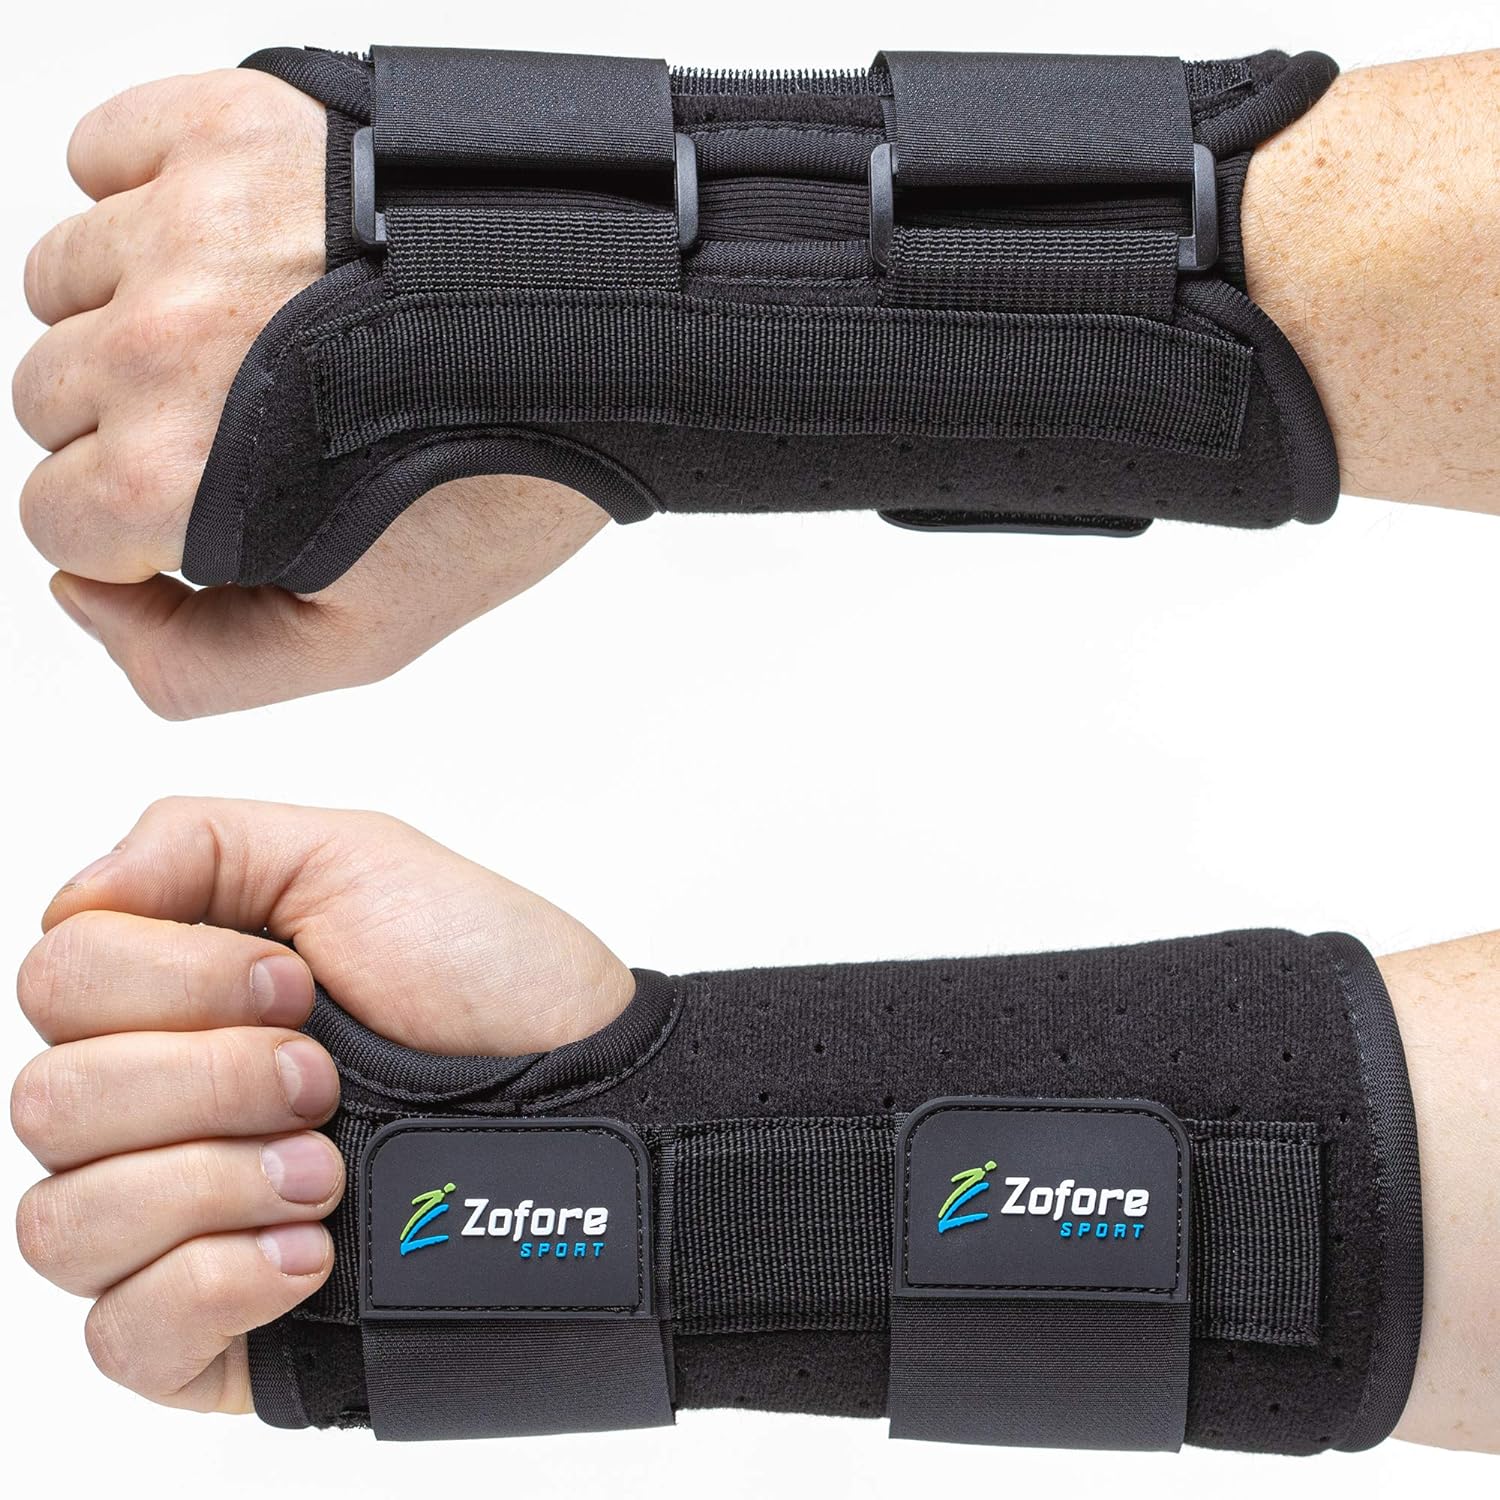 Carpal Tunnel Wrist Brace Support with 2 Straps and Metal Splint Stabilizer - Helps Relieve Tendinitis Arthritis Carpal Tunnel Pain - Reduces Recovery Time for Men Women - Right (L/XL)